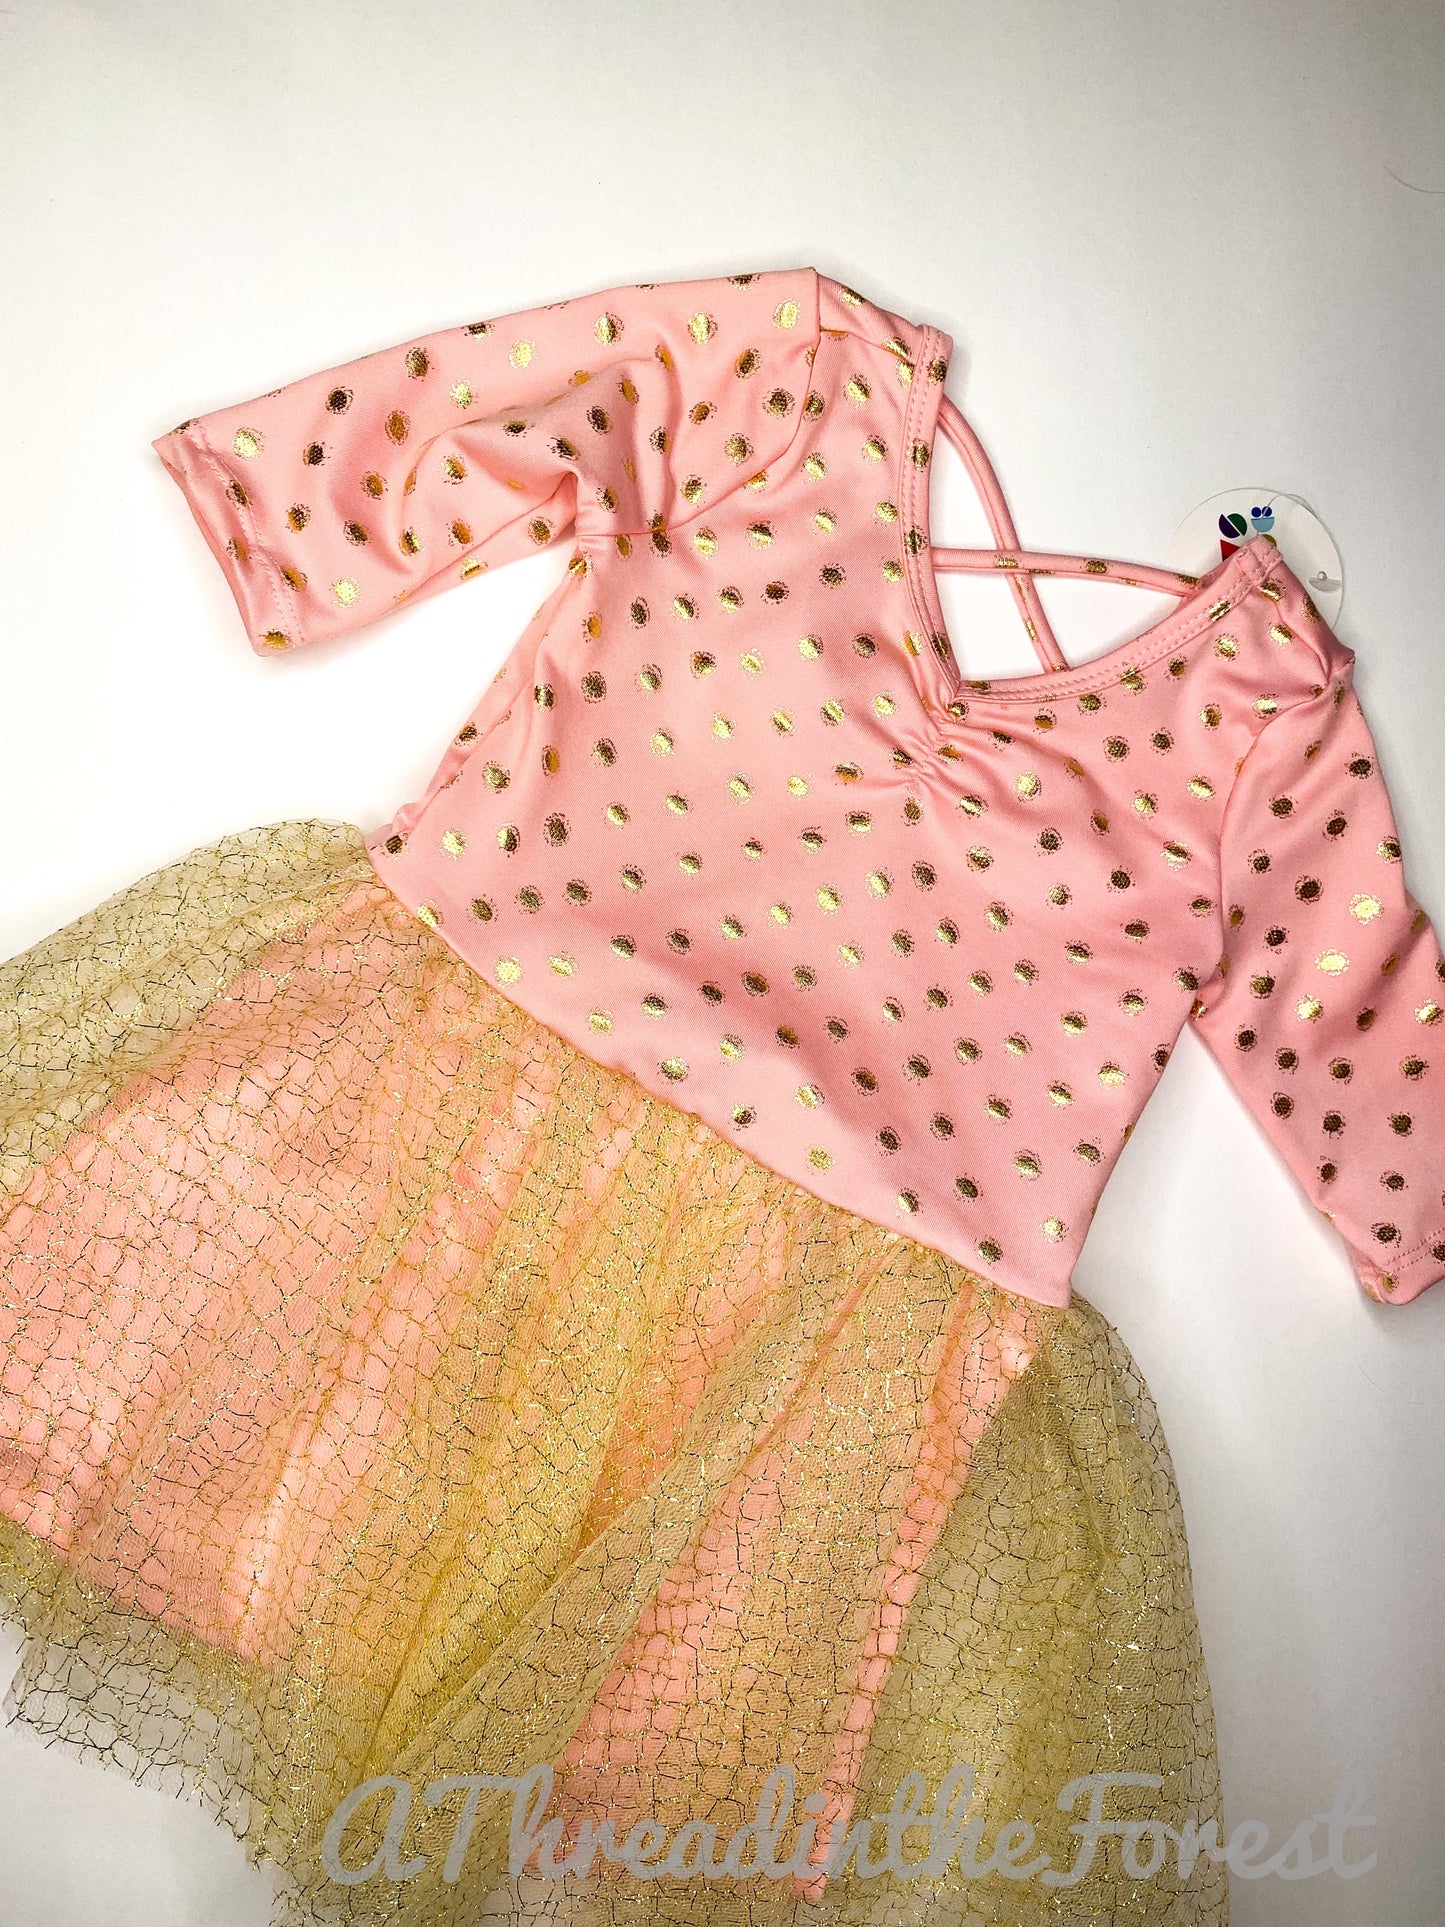 Pink with gold dots and sparkle gold lace skirt Dress Size 2T - Fancy Ballerina Style Dress